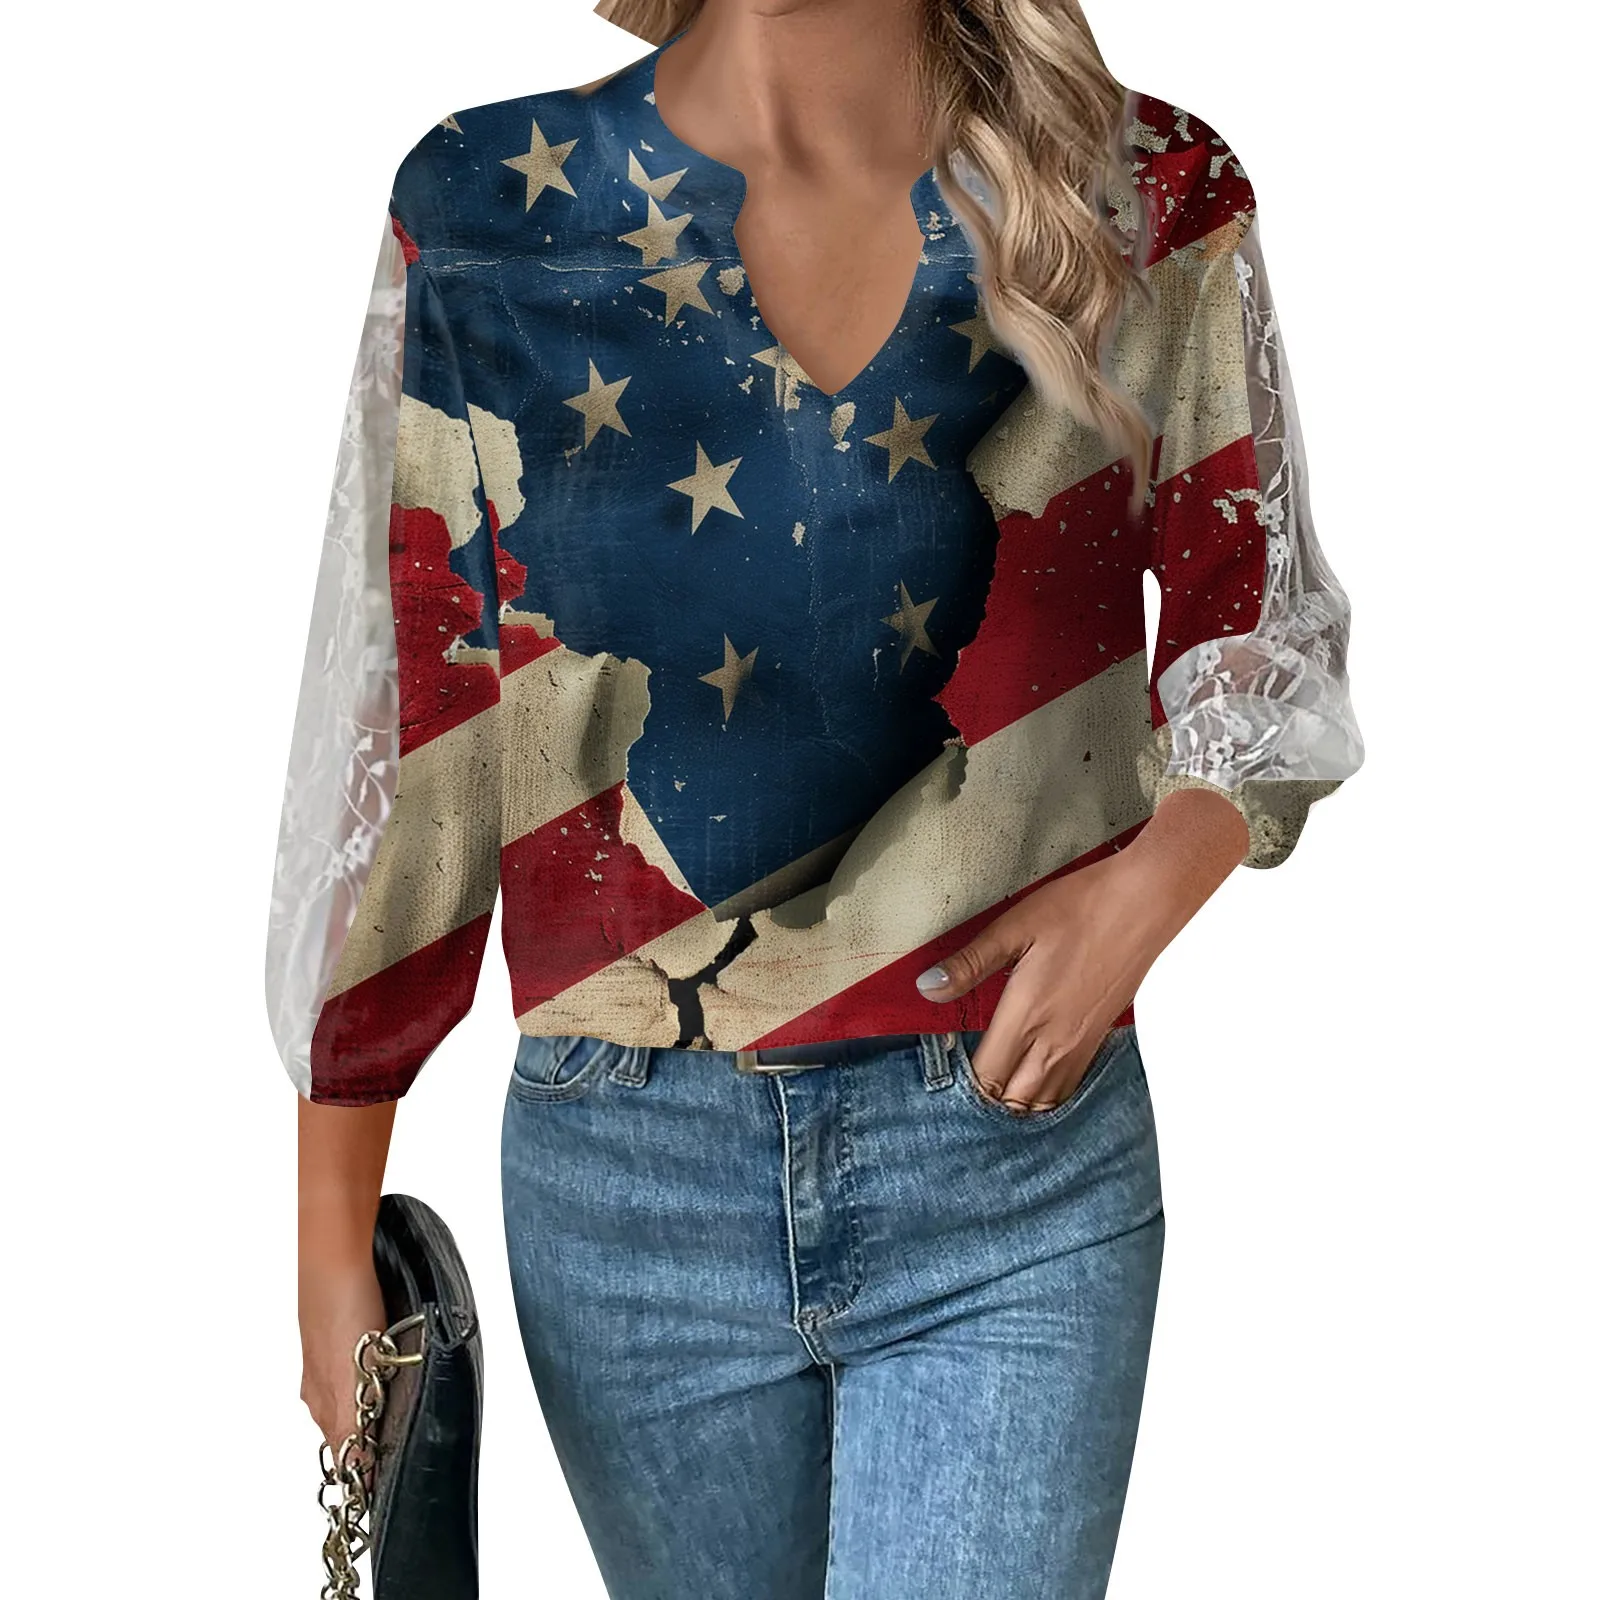 

3/4 Length Sleeve Womens Tops Casual Loose Fit V-neck T Shirts Cute Print Lace Sleeve Tunic Tops camisas e blusas кофта женская